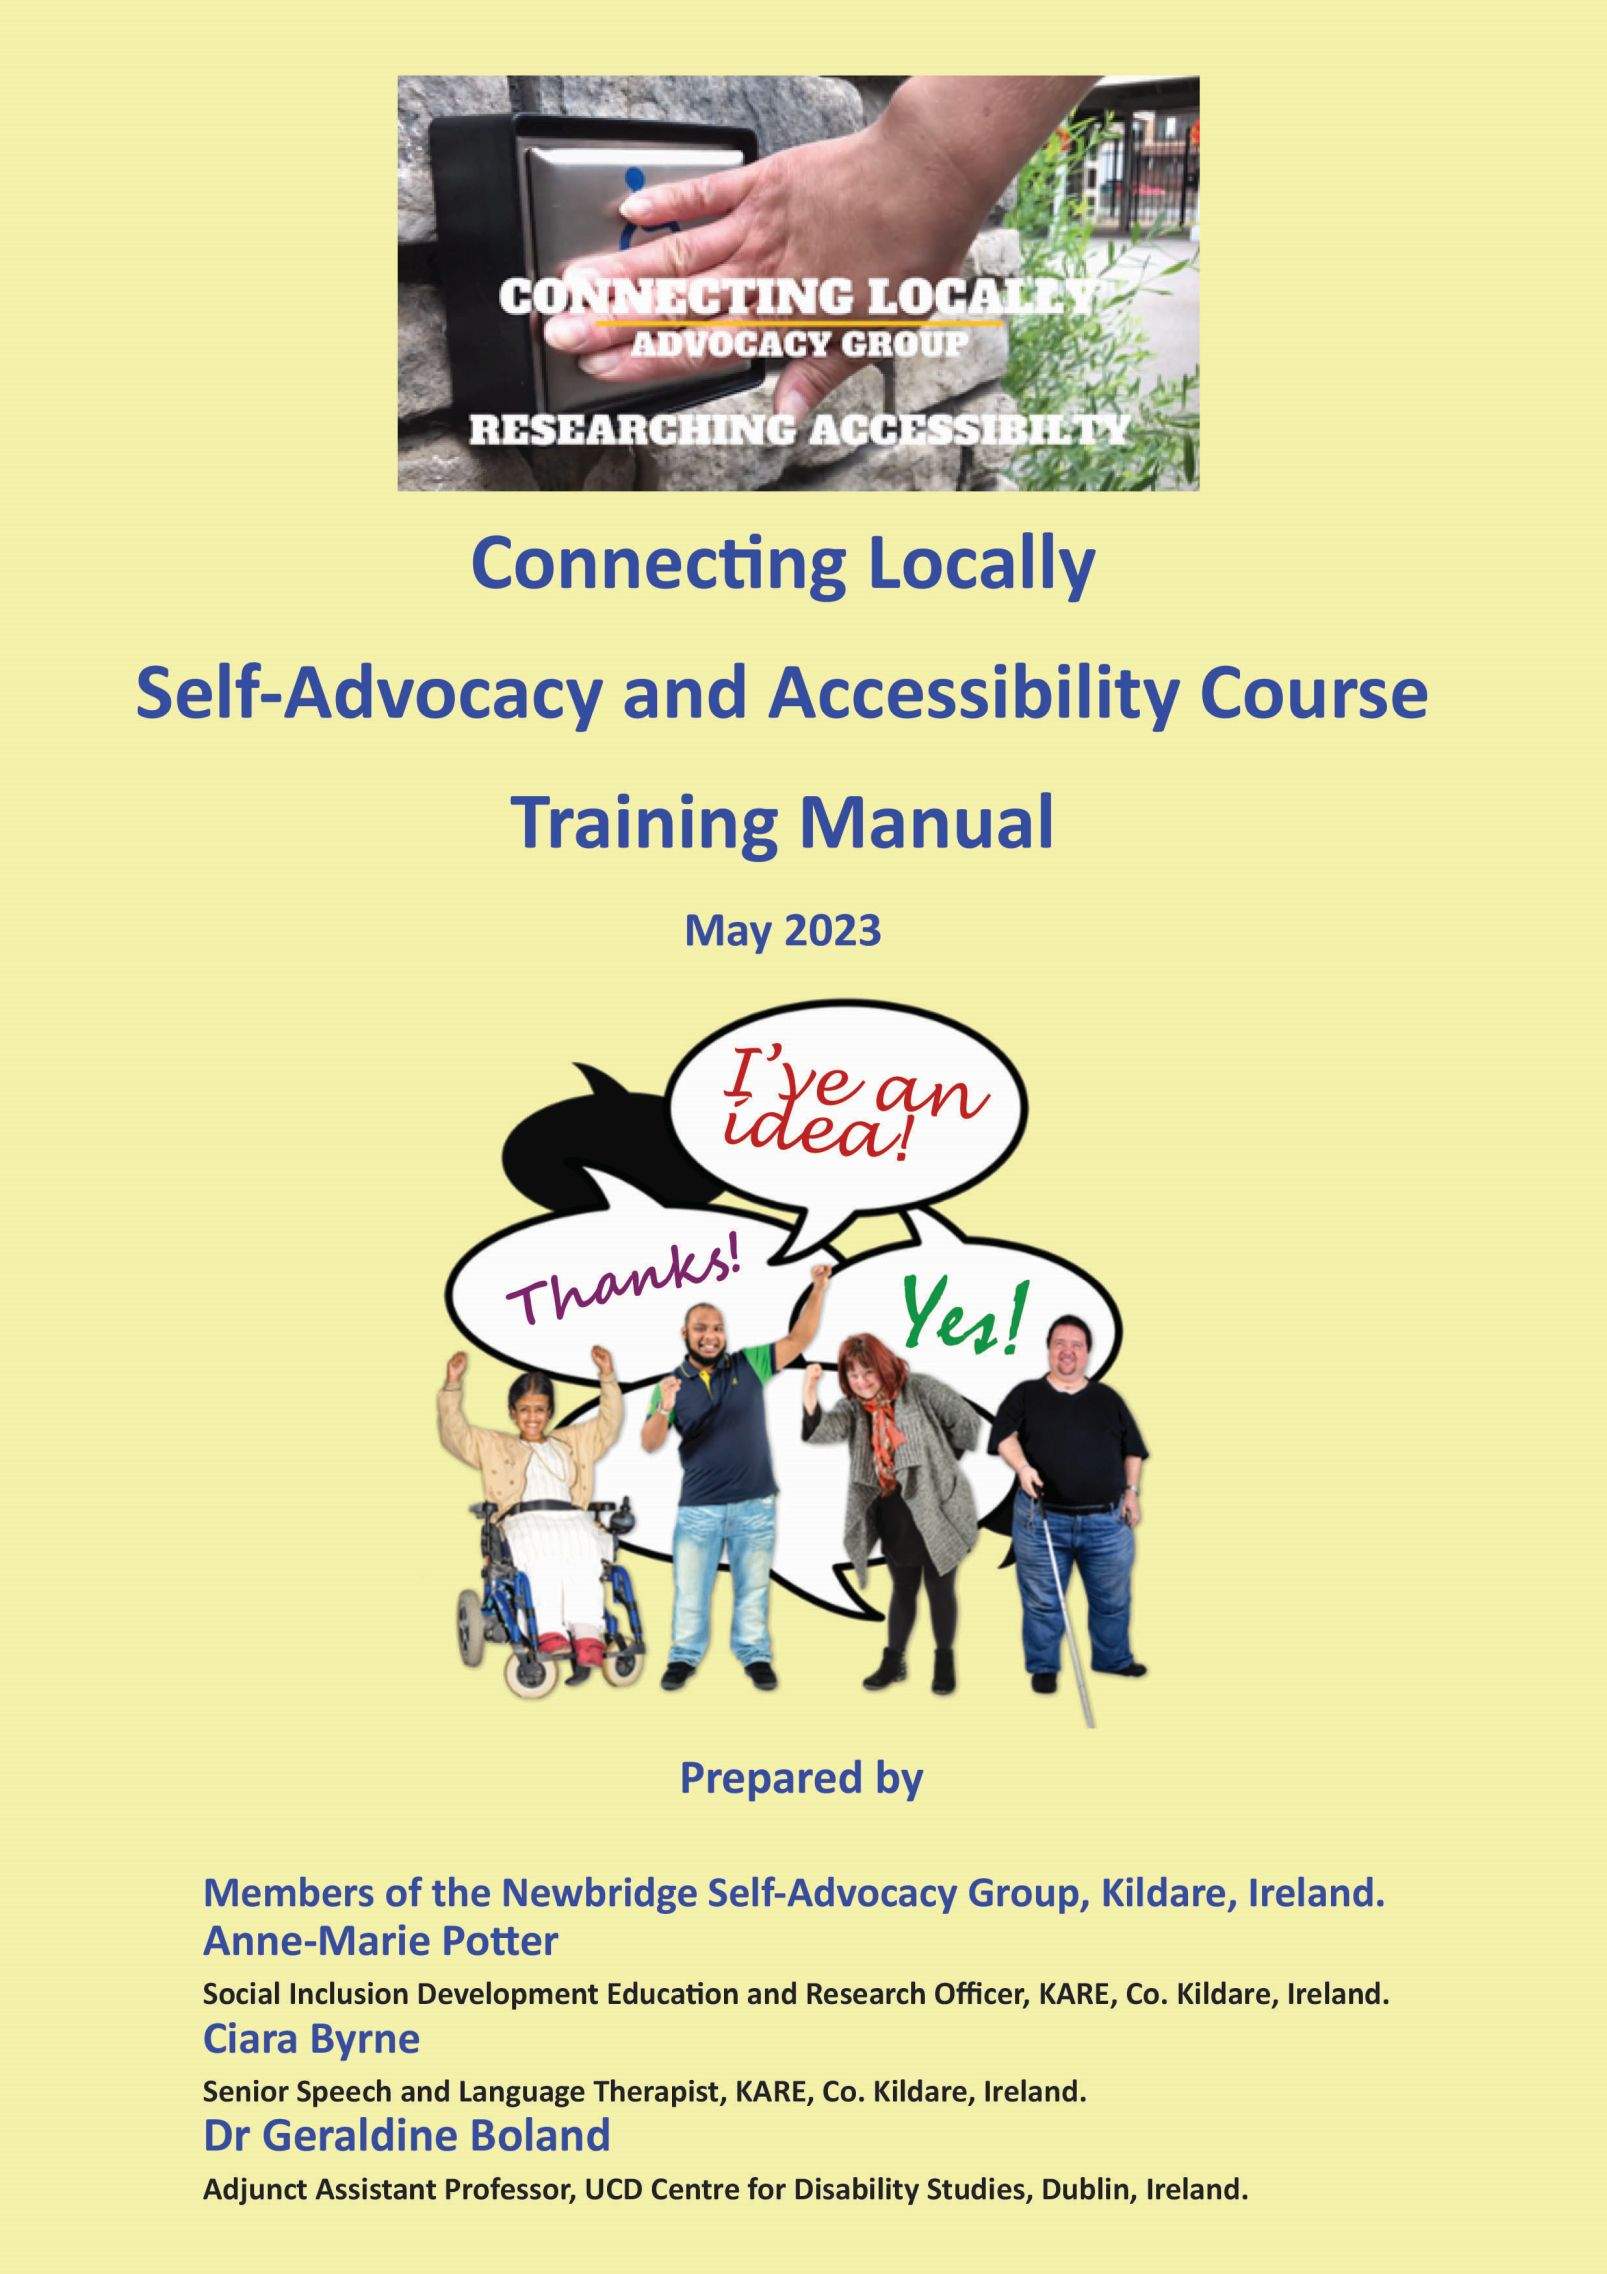 self-advocacy, accessibility, disability,